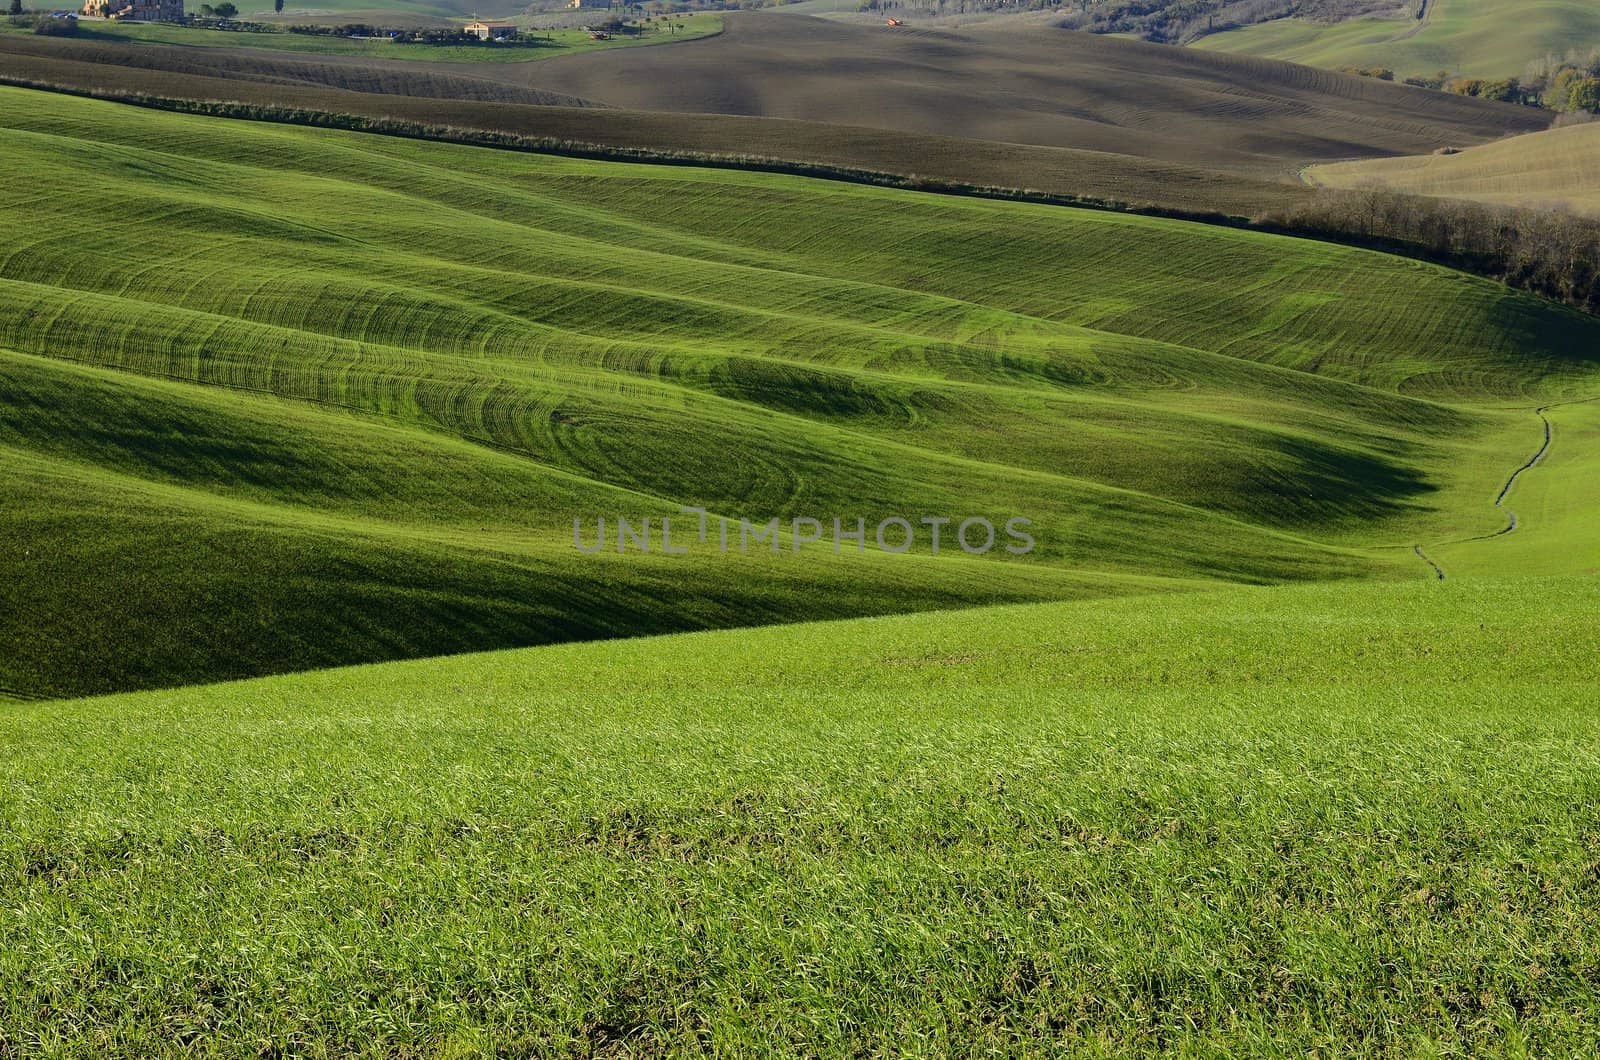 A typical green hillside landsdscape in Tuscany